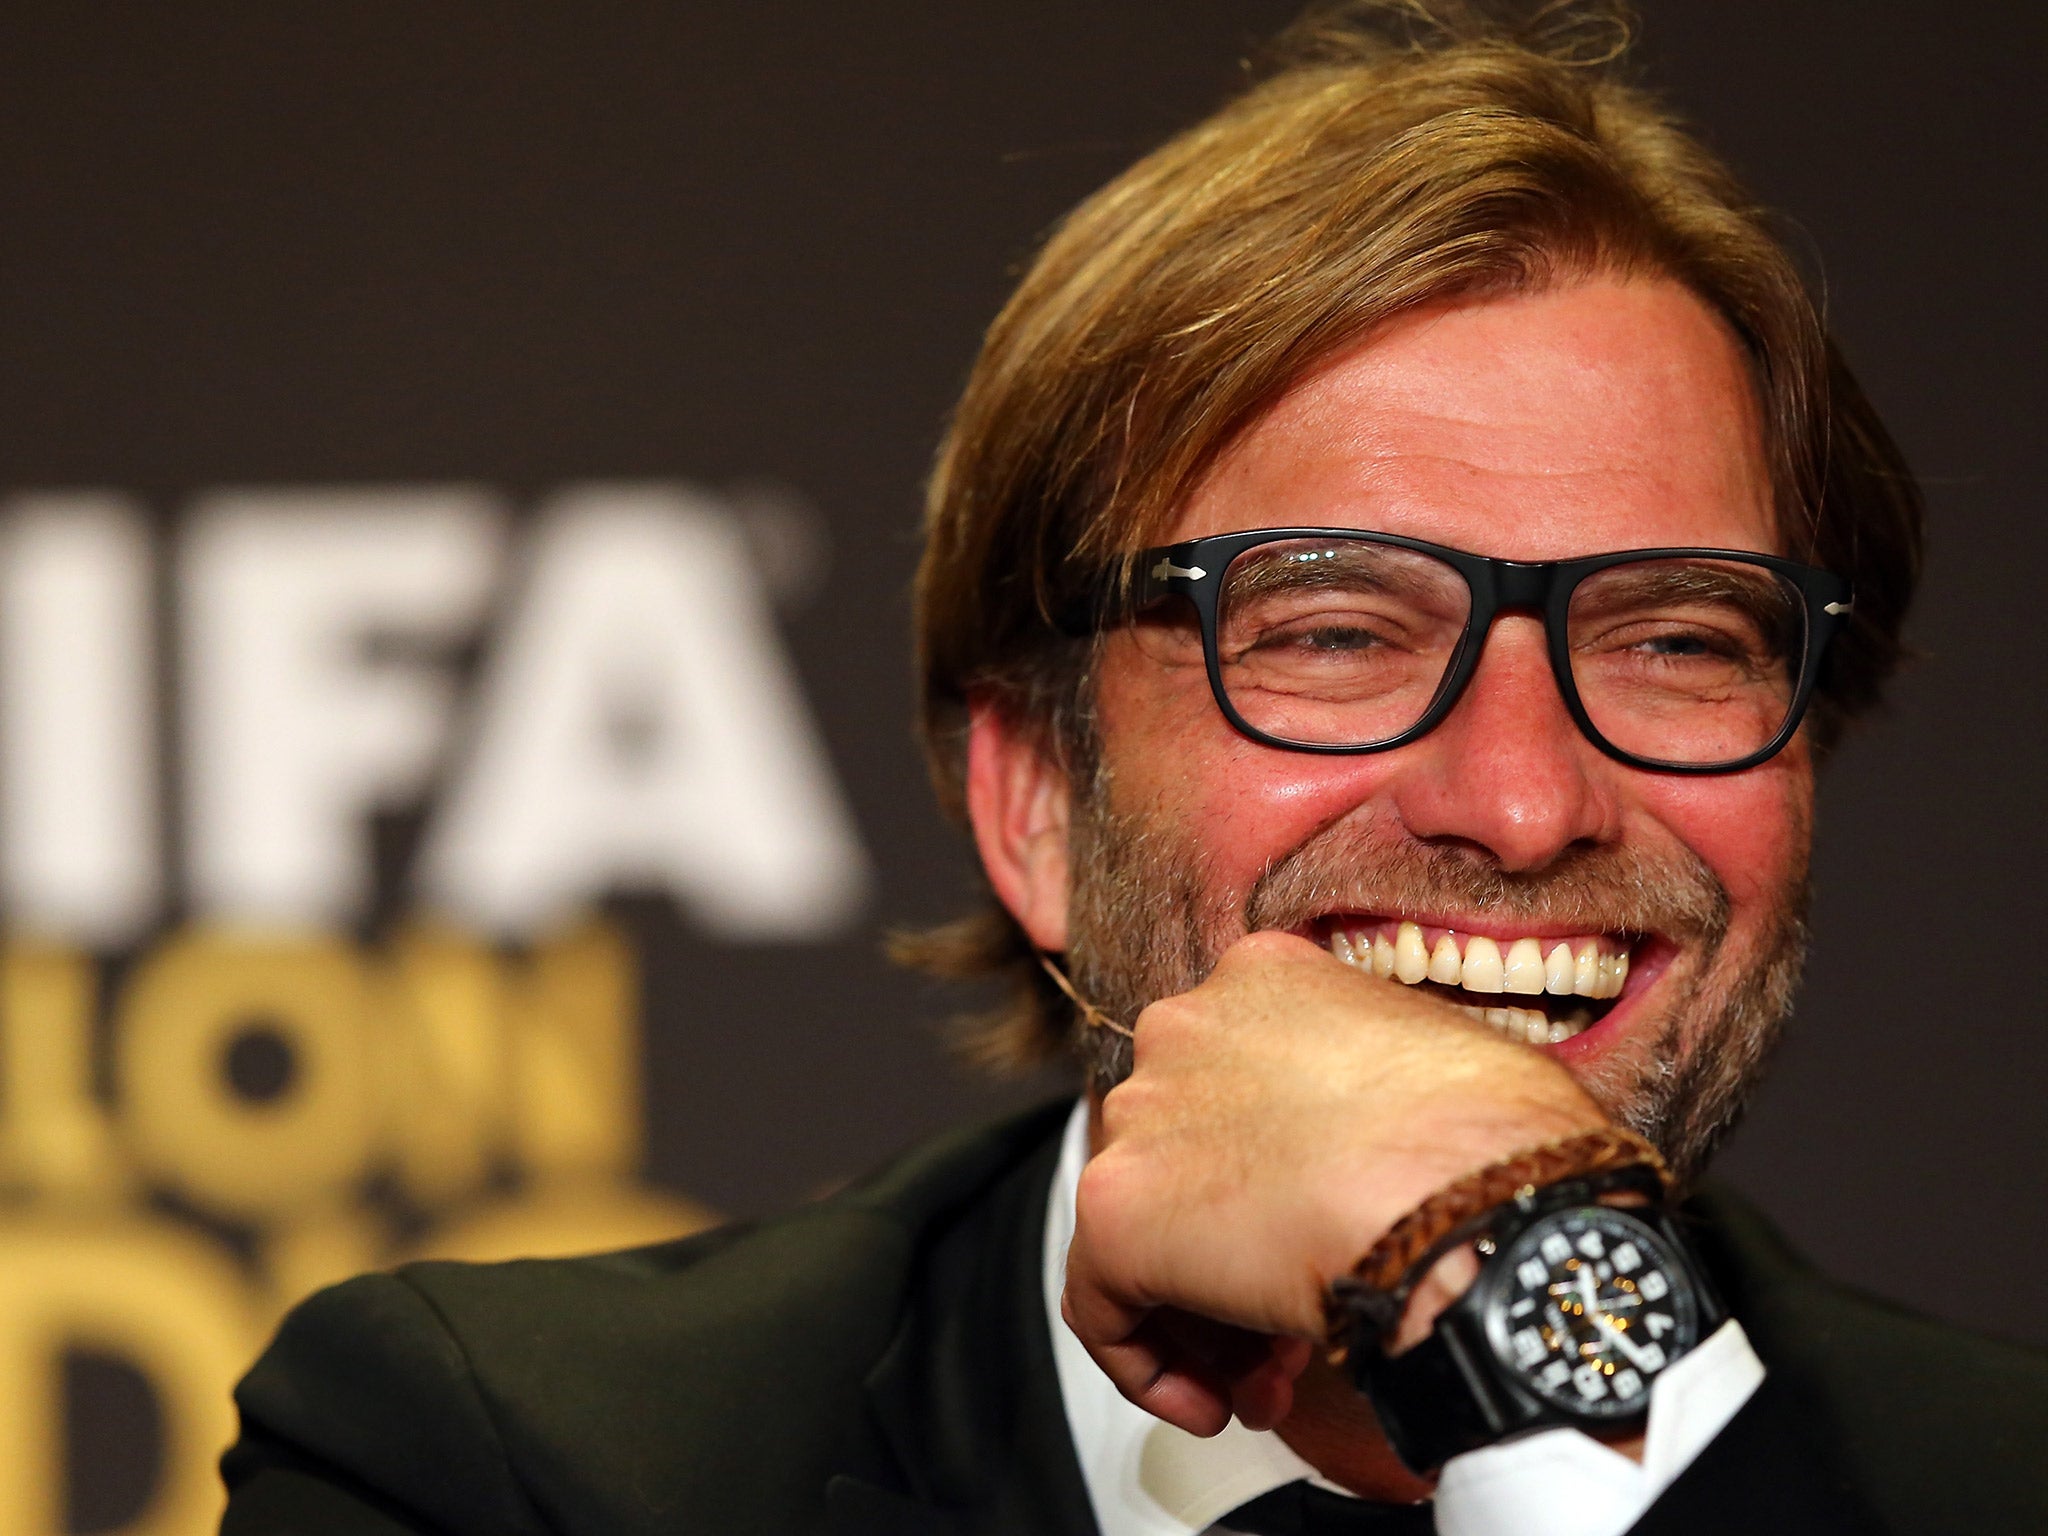 The former Borussia Dortmund coach will be just as happy at the appointment